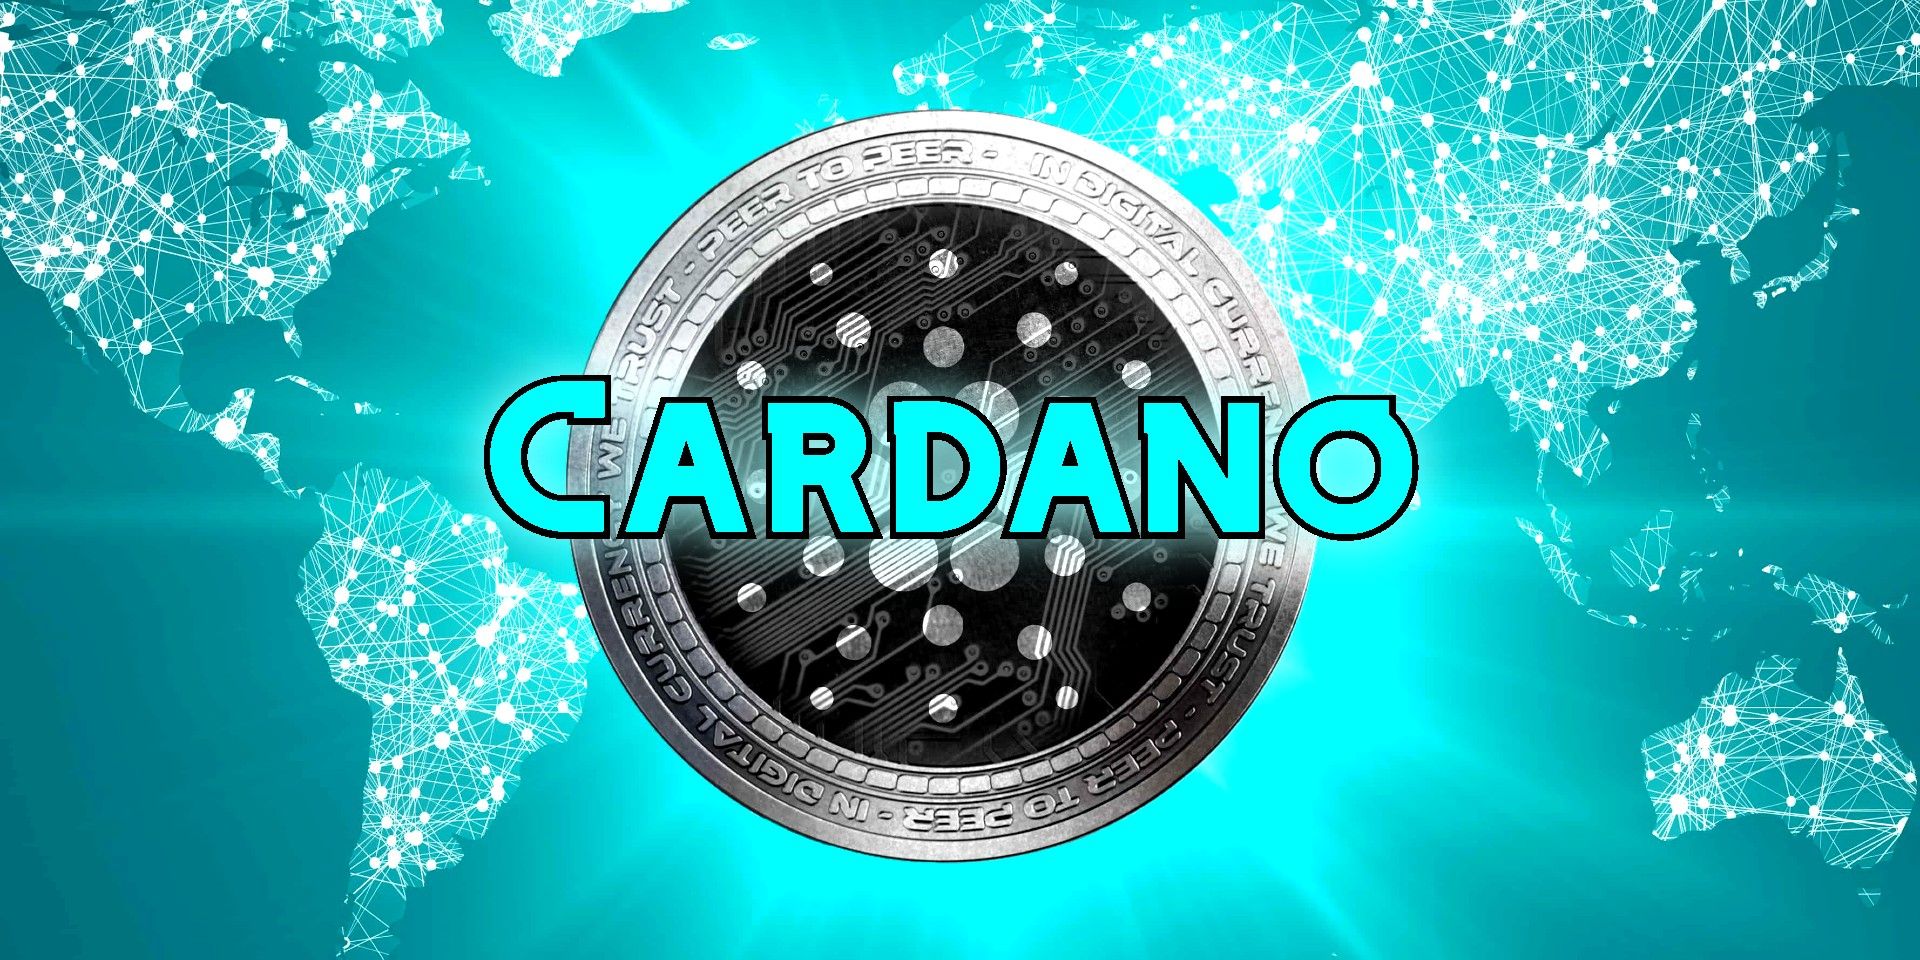 Cardano over cryptocurrency art world networks